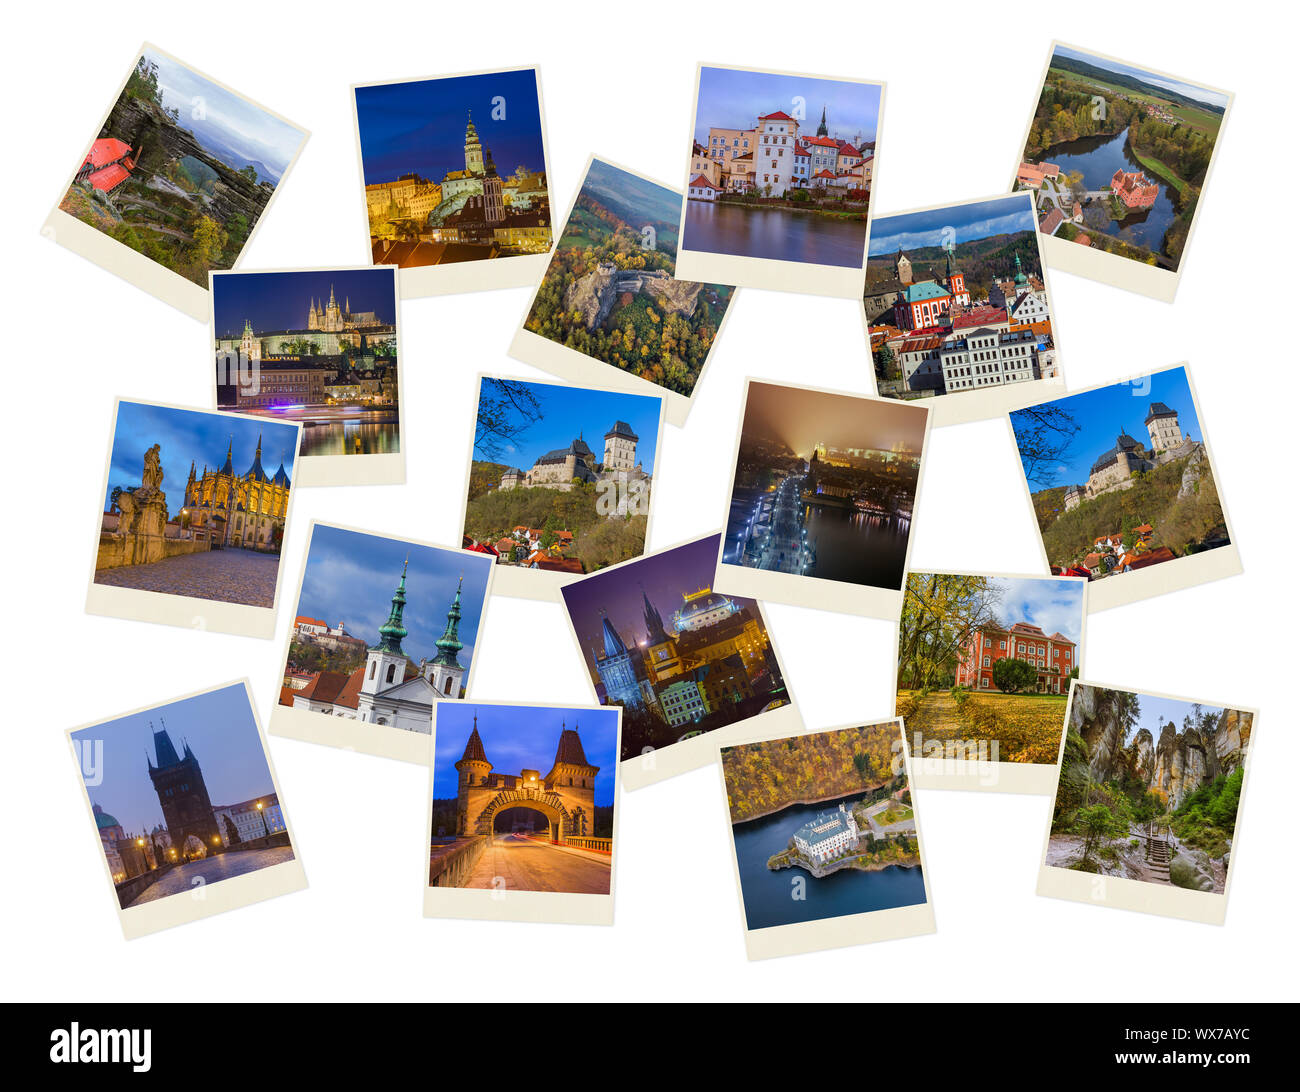 Collage of Czech republic images (my photos) Stock Photo